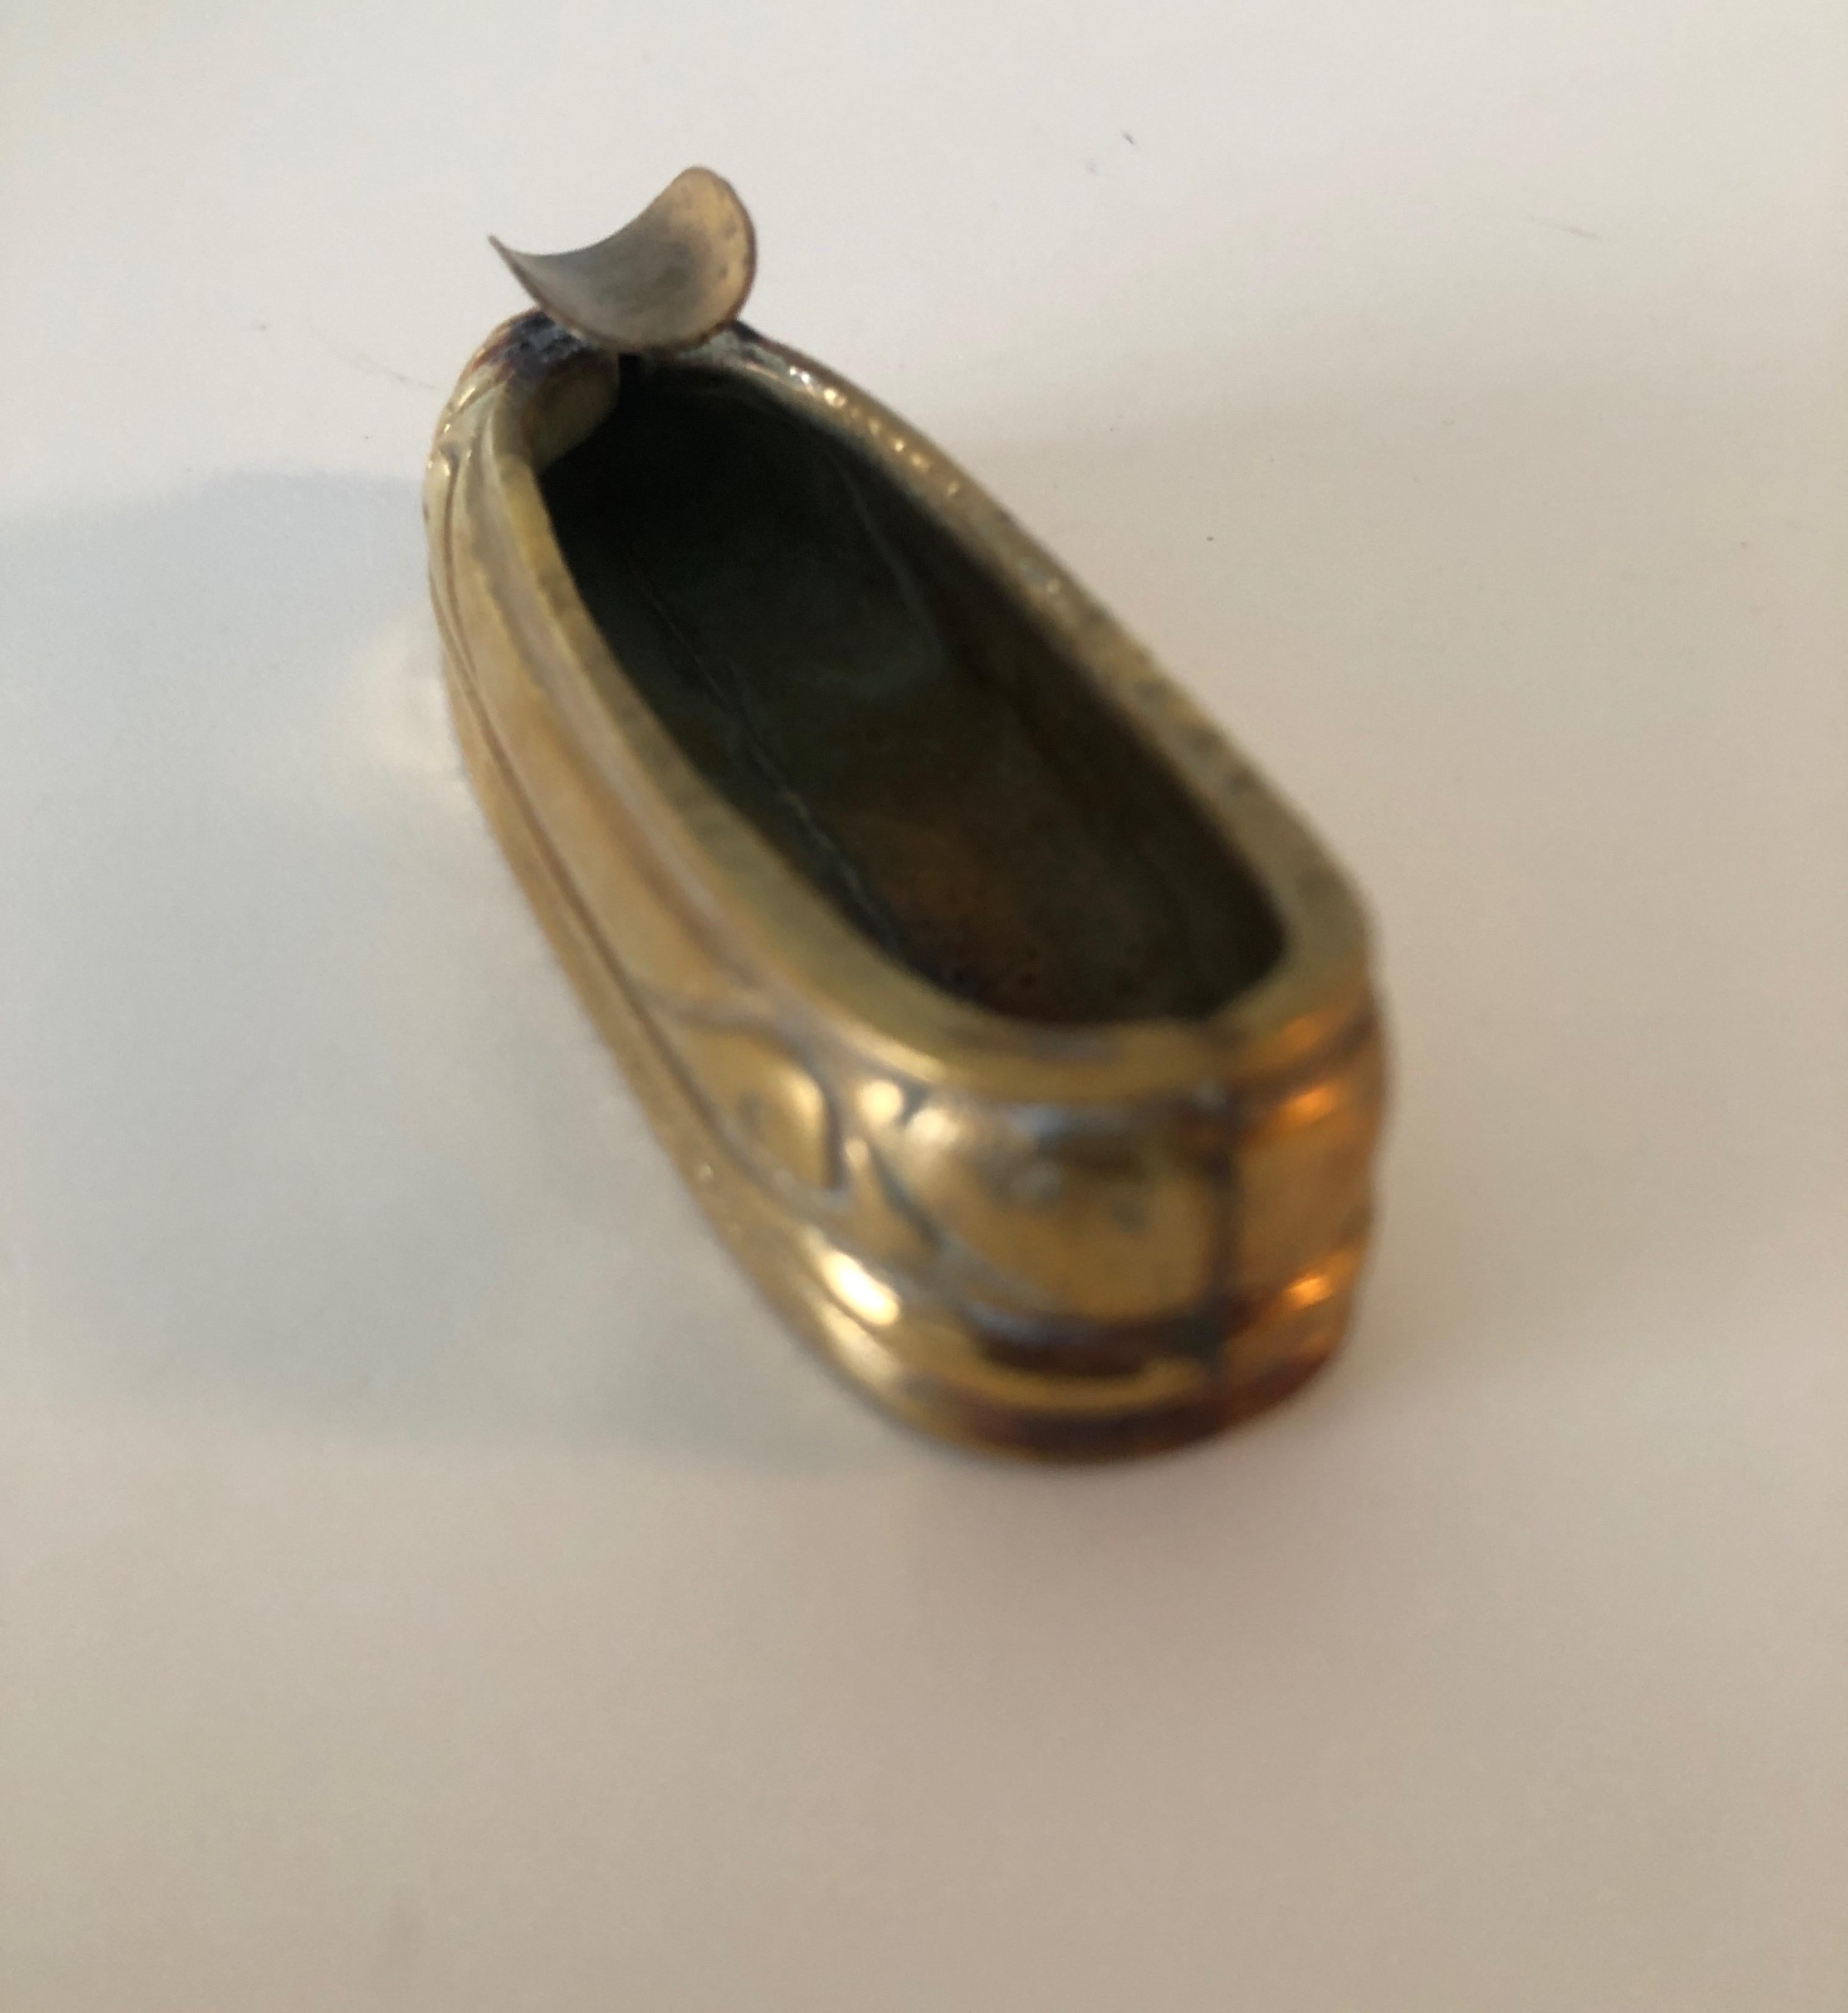 Hand-Crafted Vintage Small Brass Ballerina Slipper Ashtray